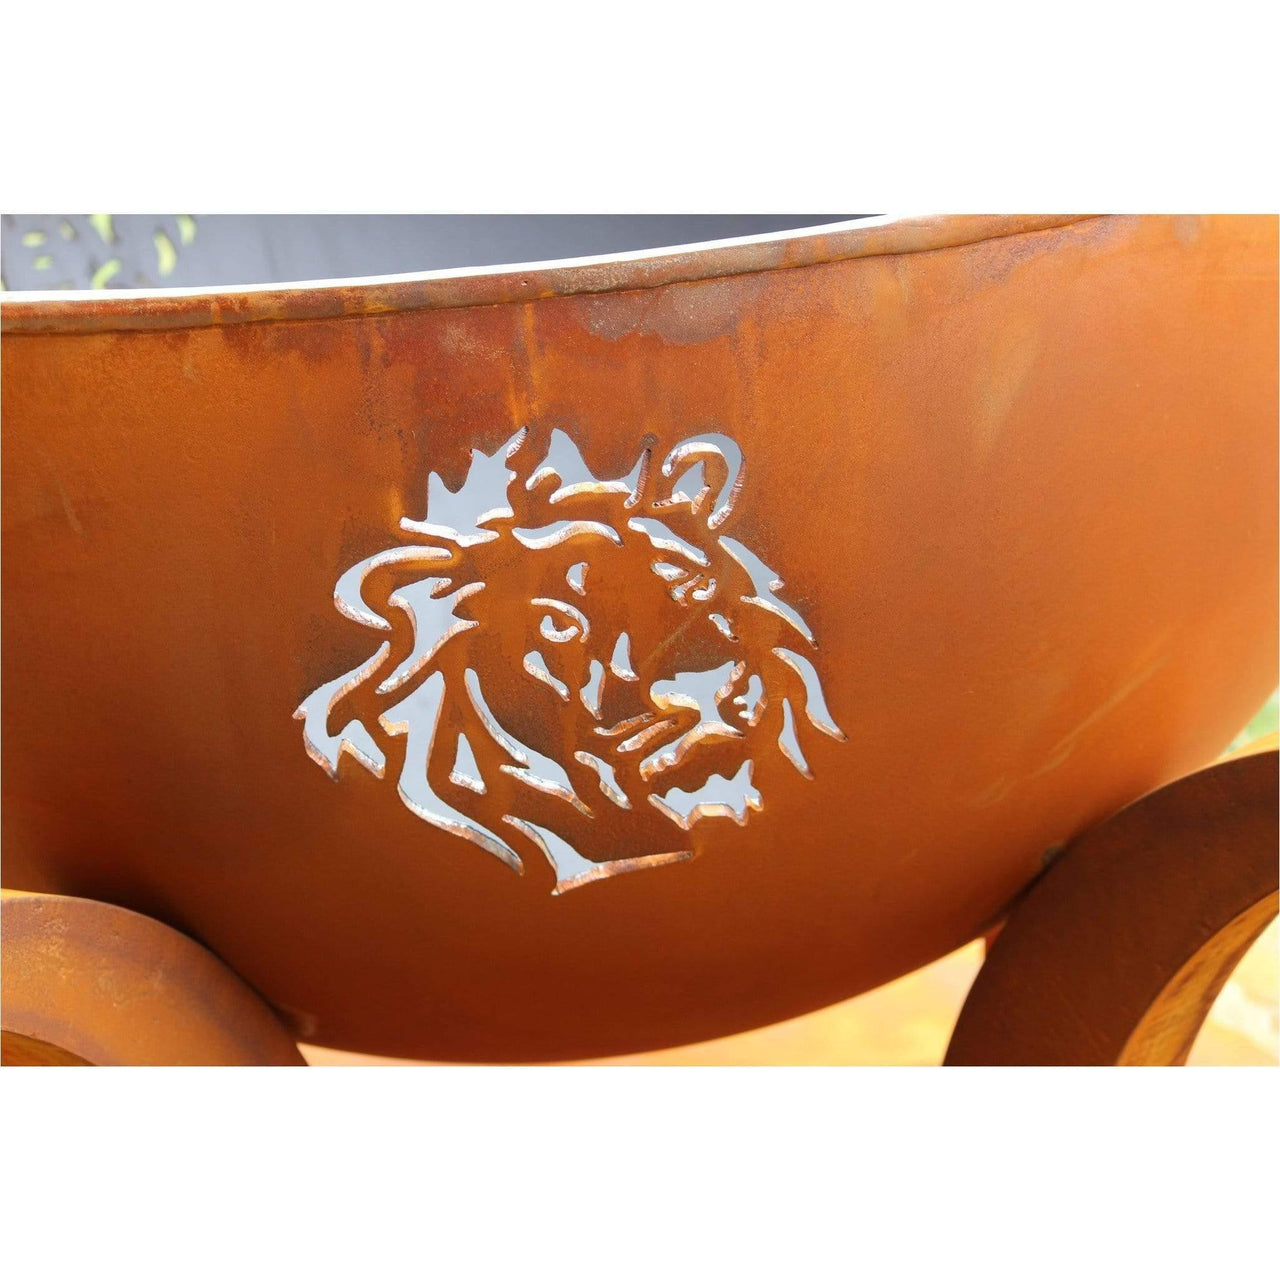 Fire Pit Art - Africa's Big Five 41" Carbon Steel Round Fire Pit - Fire Pit Stock